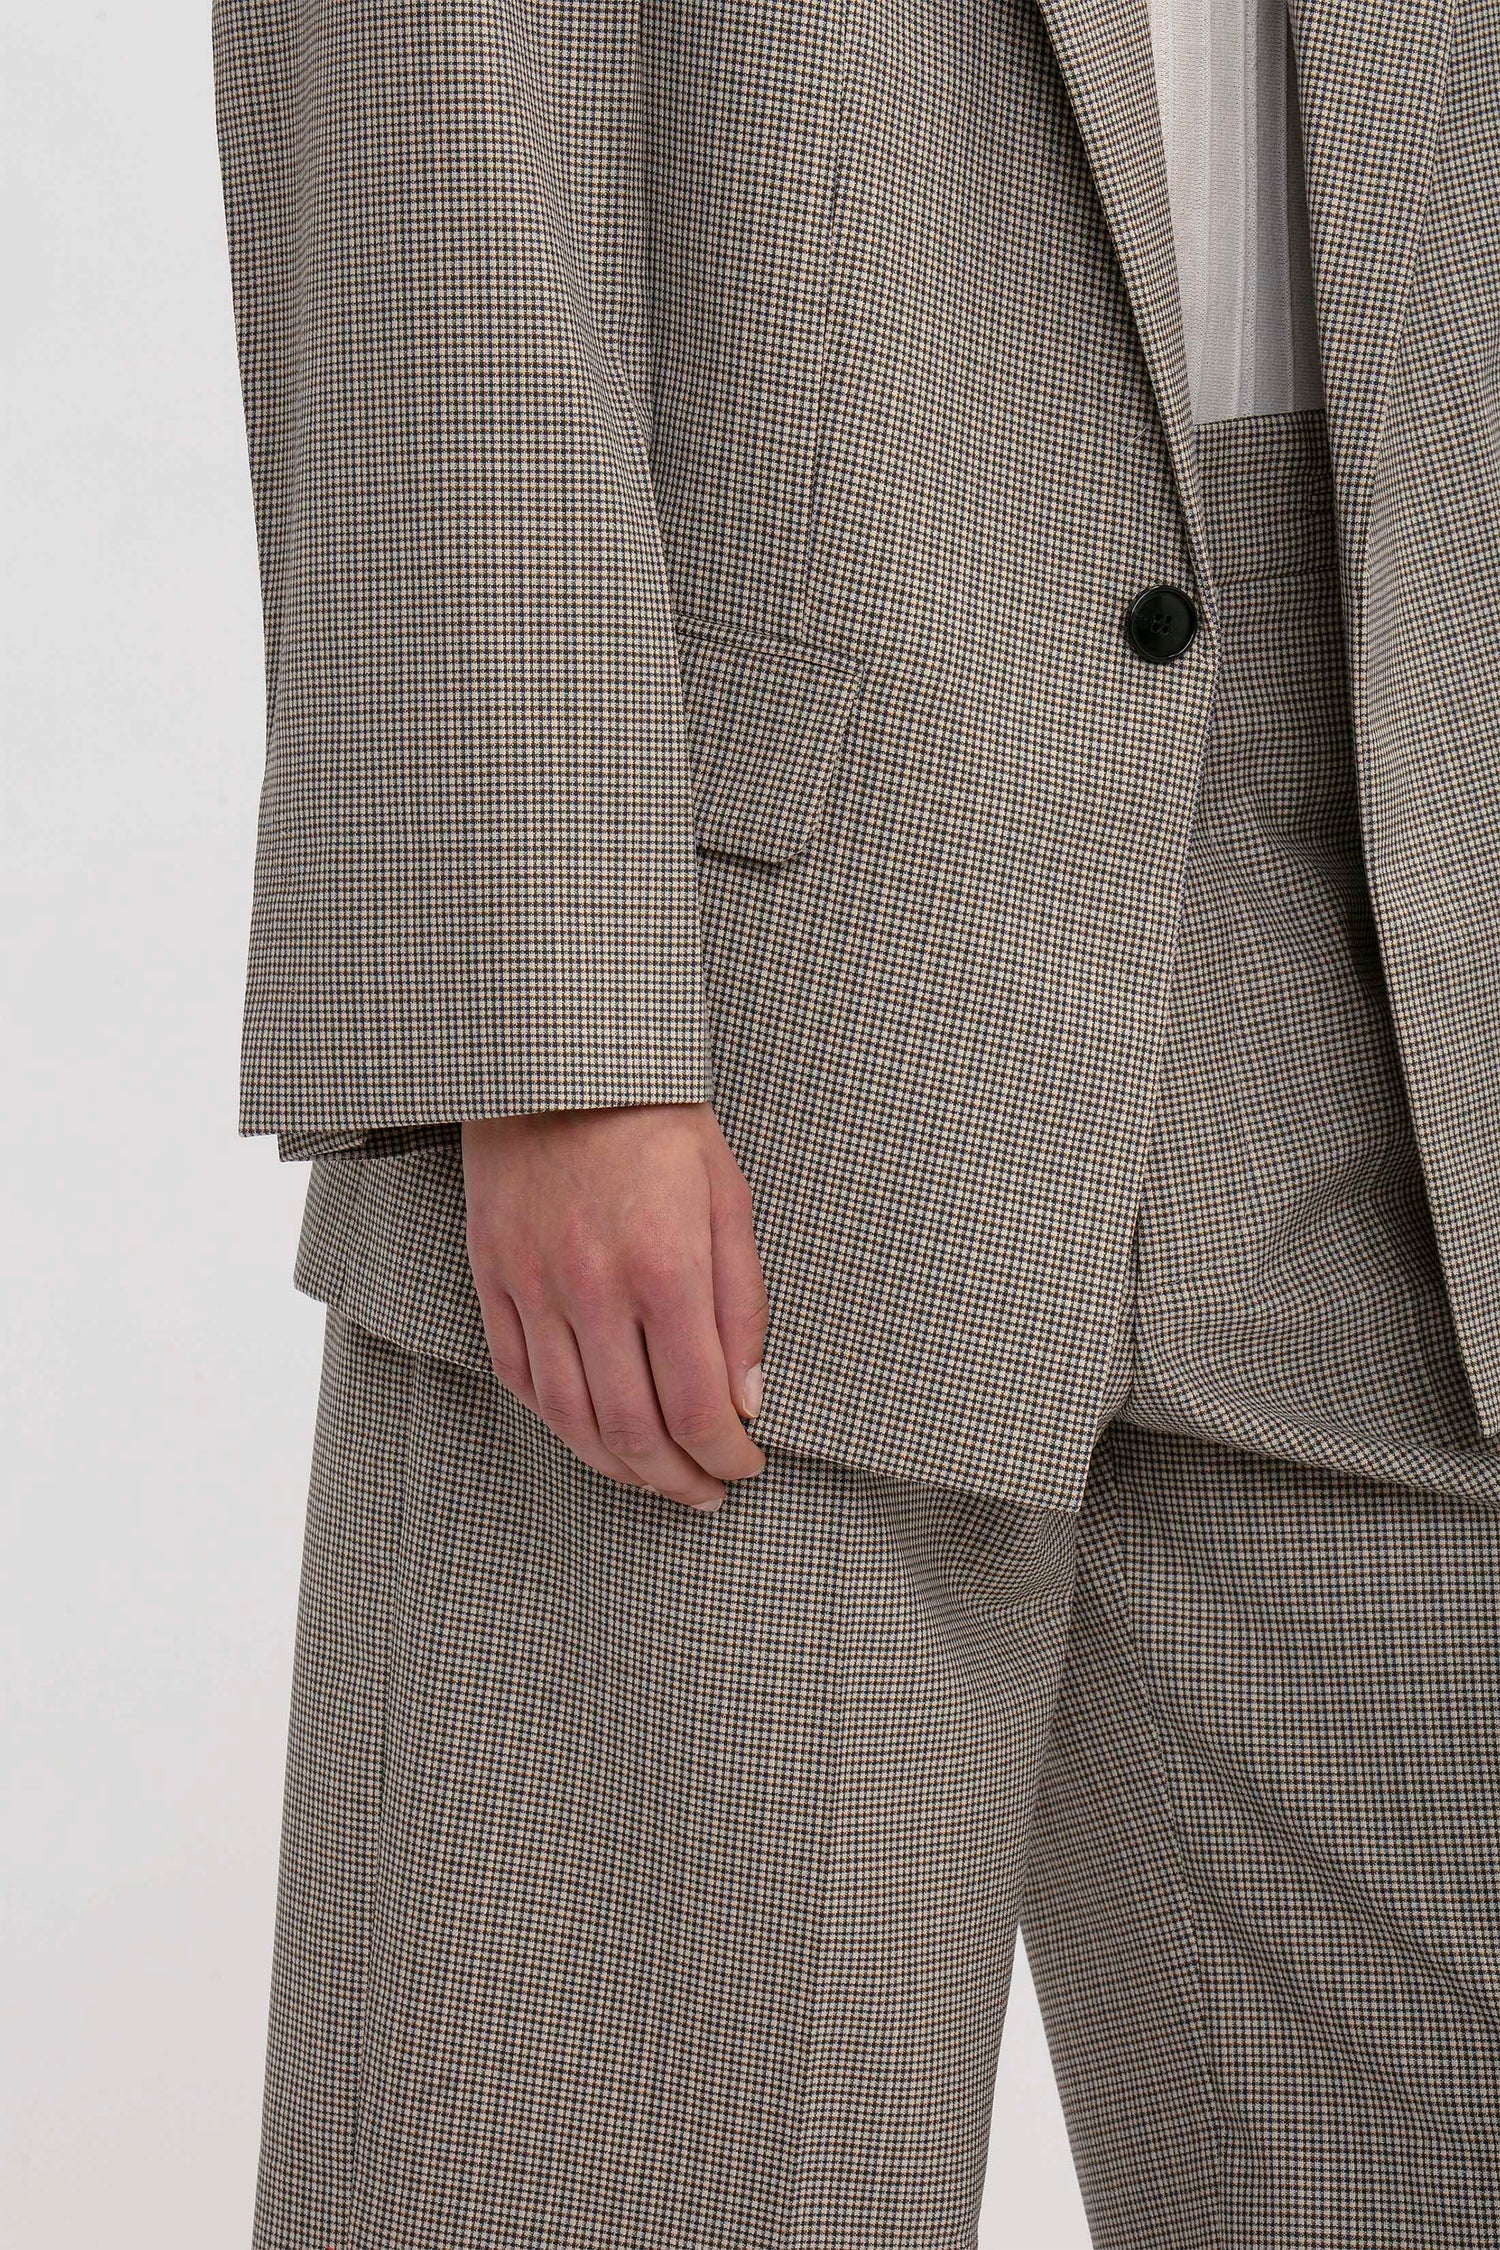 Close-up of a person wearing the Victoria Beckham Peak Lapel Jacket In Multi and matching pants with a contemporary aesthetic; only the torso and part of the arm are visible.